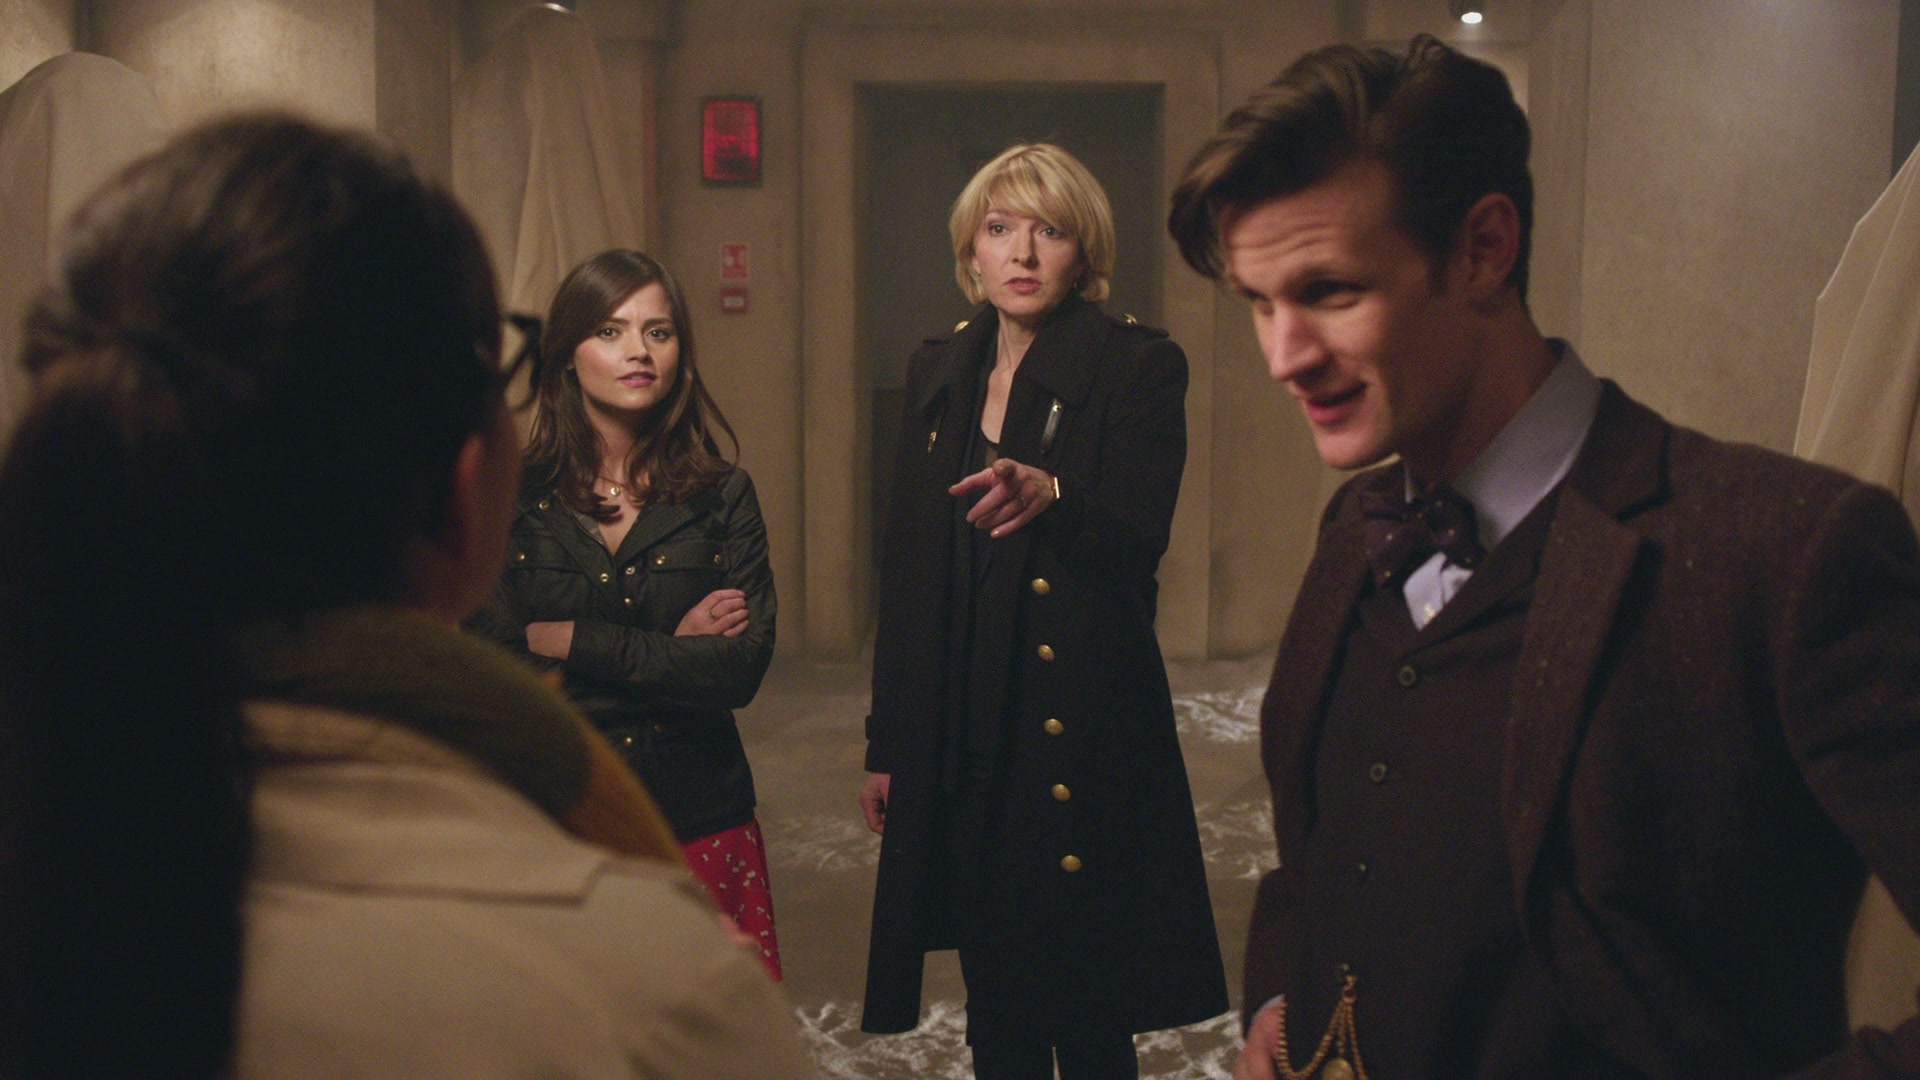 DayOfTheDoctor-Caps-0338.jpg